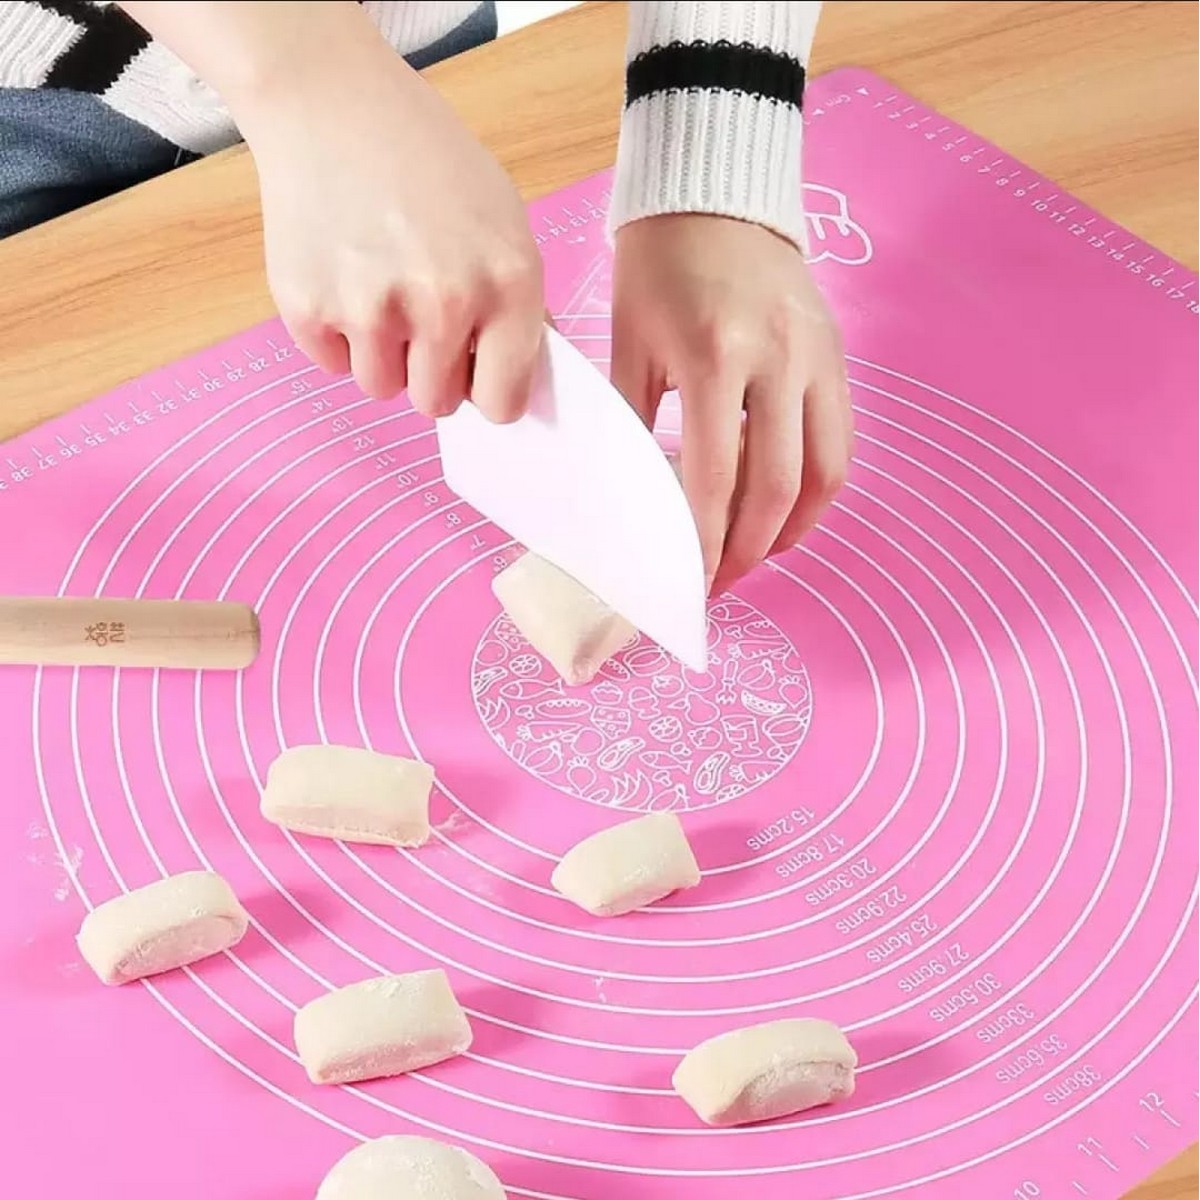 Extra Large Silicone Roti Mat Baking Mat Sheet Pizza Mat Rolling Dough Non-stick Maker Pastry Kitchen Gadgets Cooking Tools Bakeware Accessories (code 37 Rotimat )